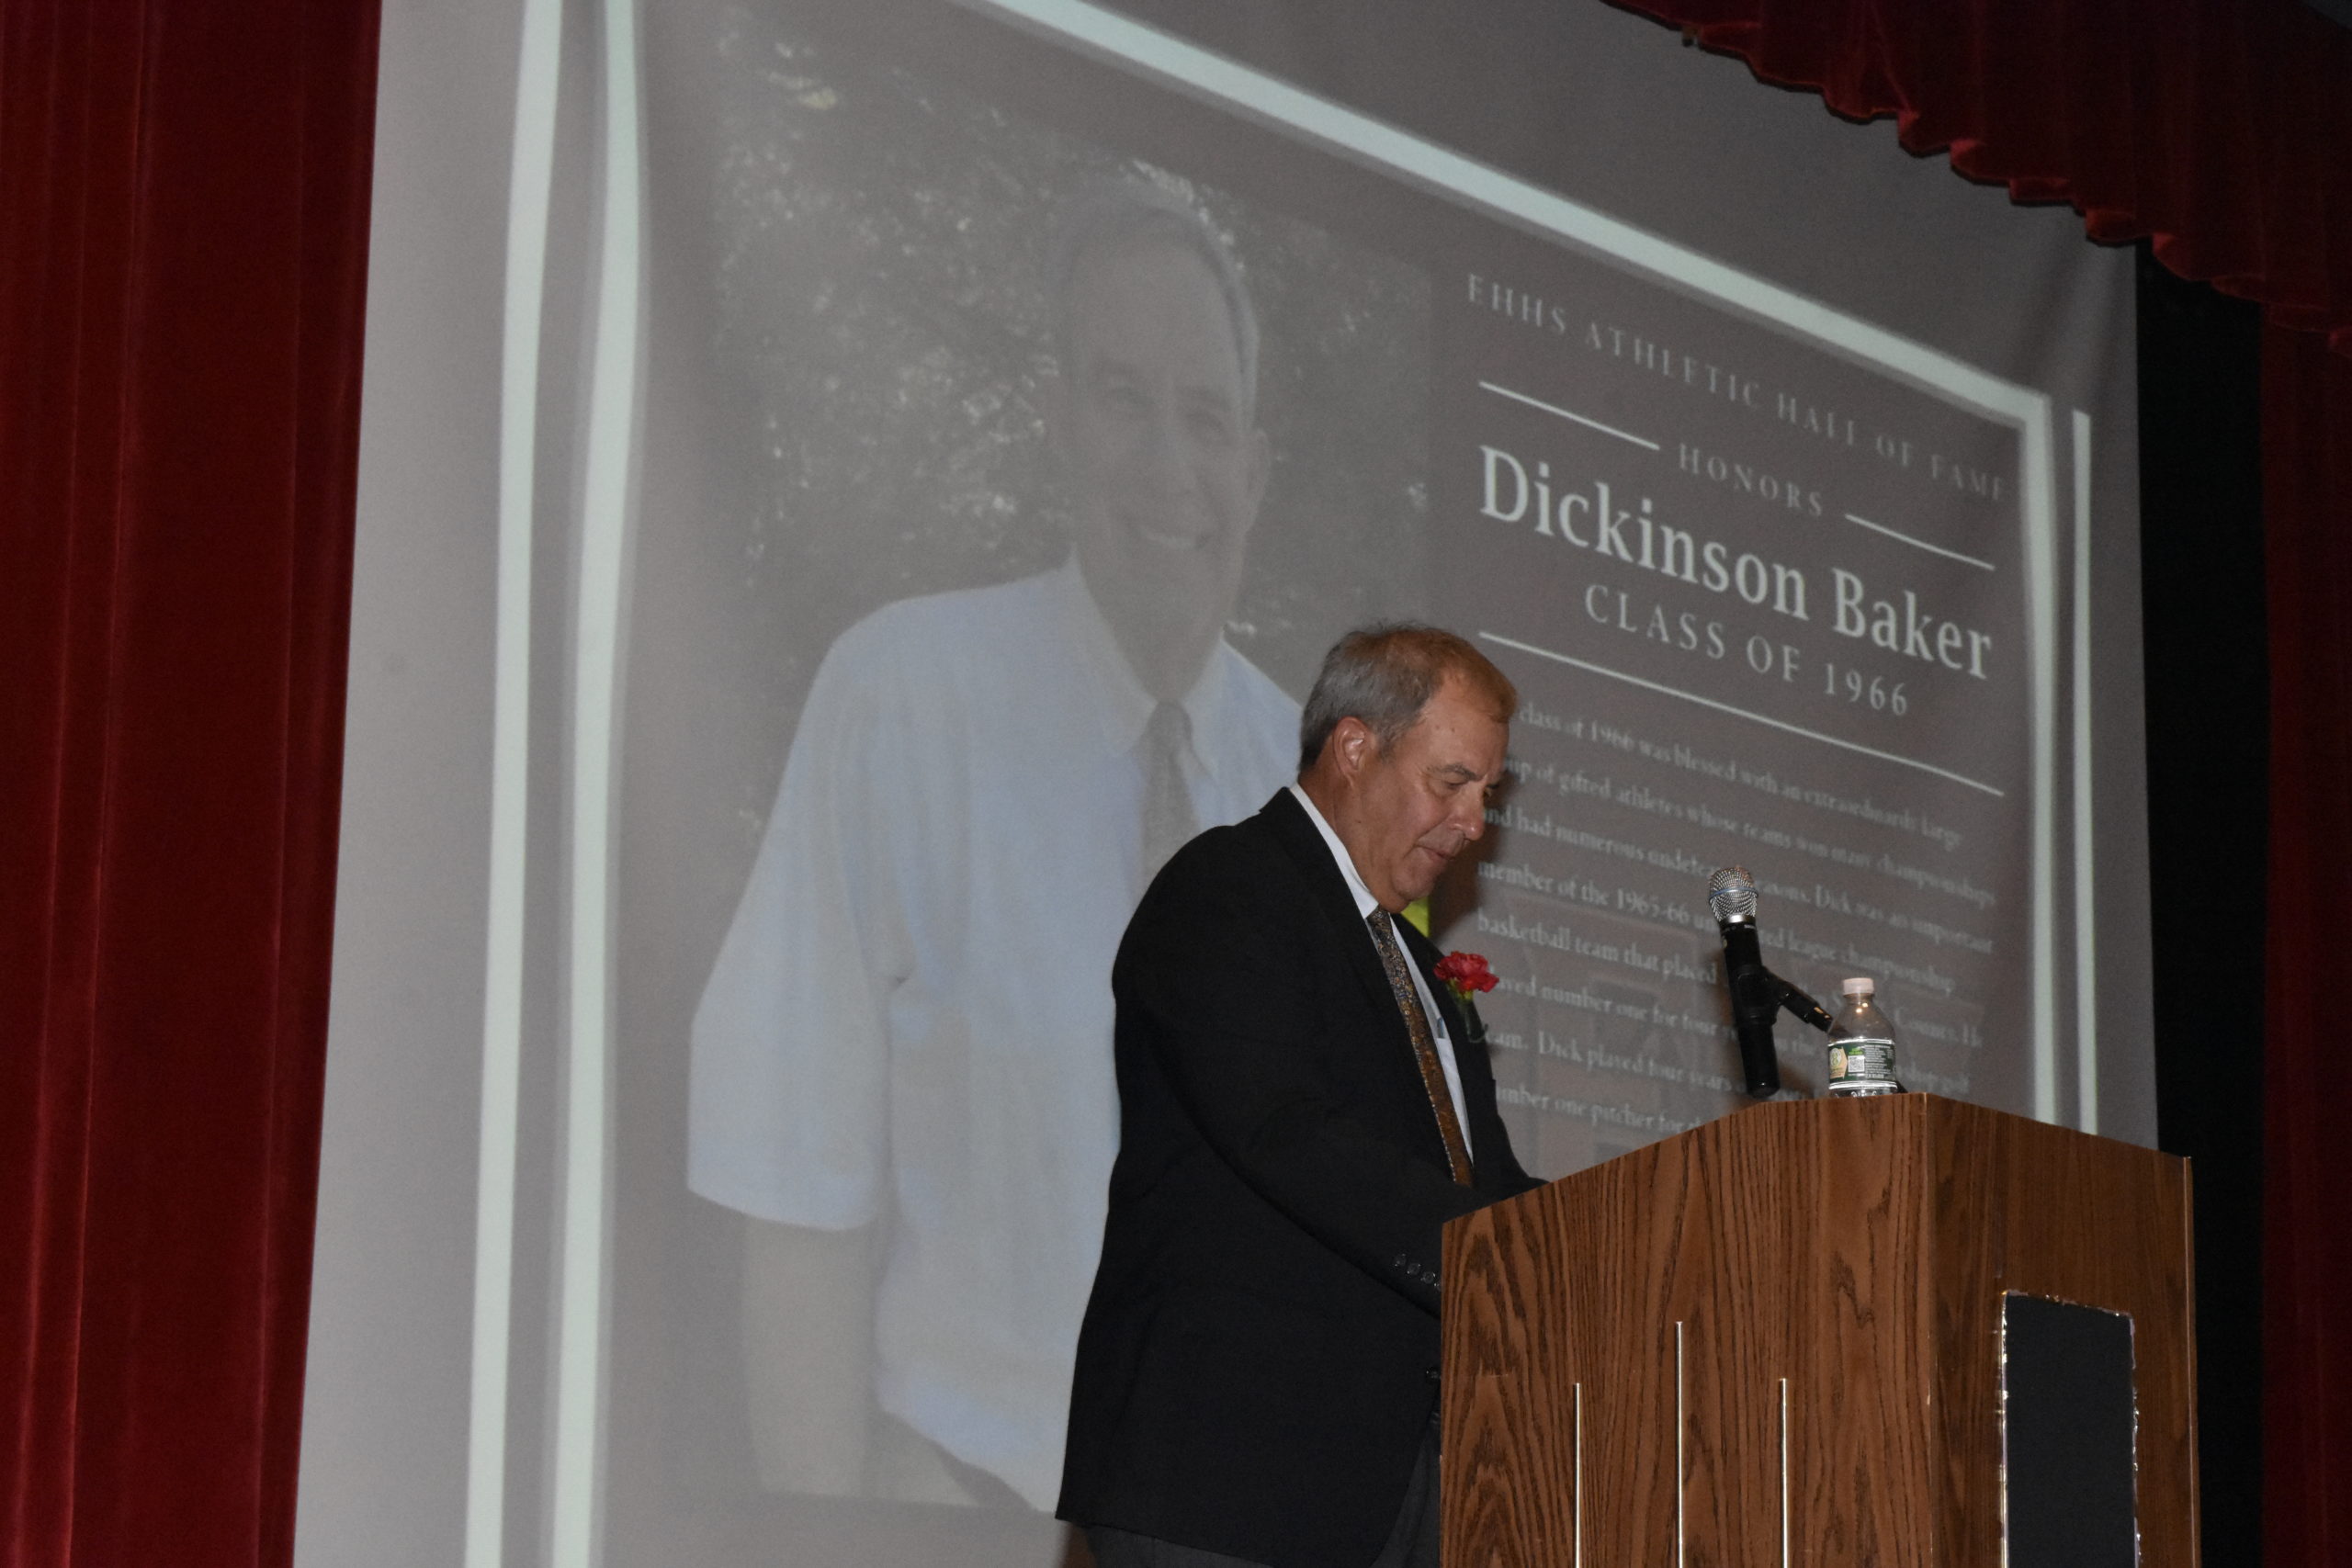 Dickinson Baker was the first inductee on Saturday morning.